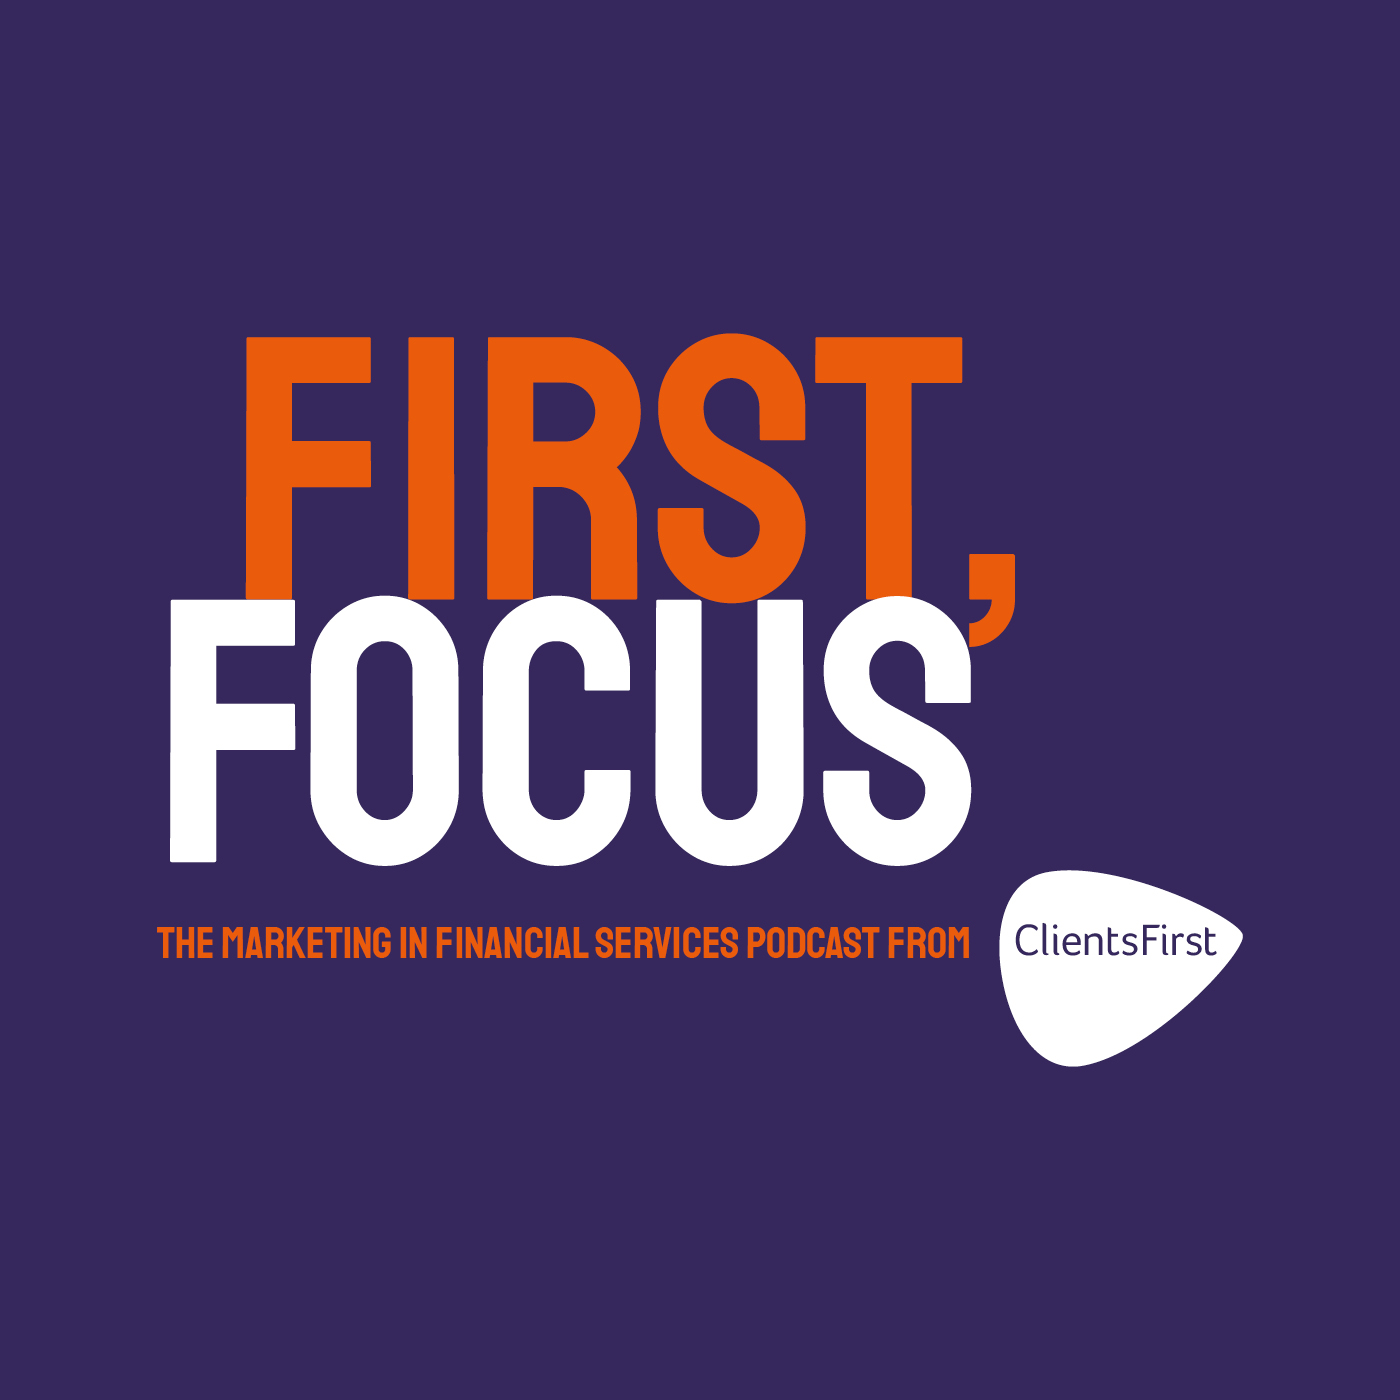 First, Focus - A Financial Services Podcast